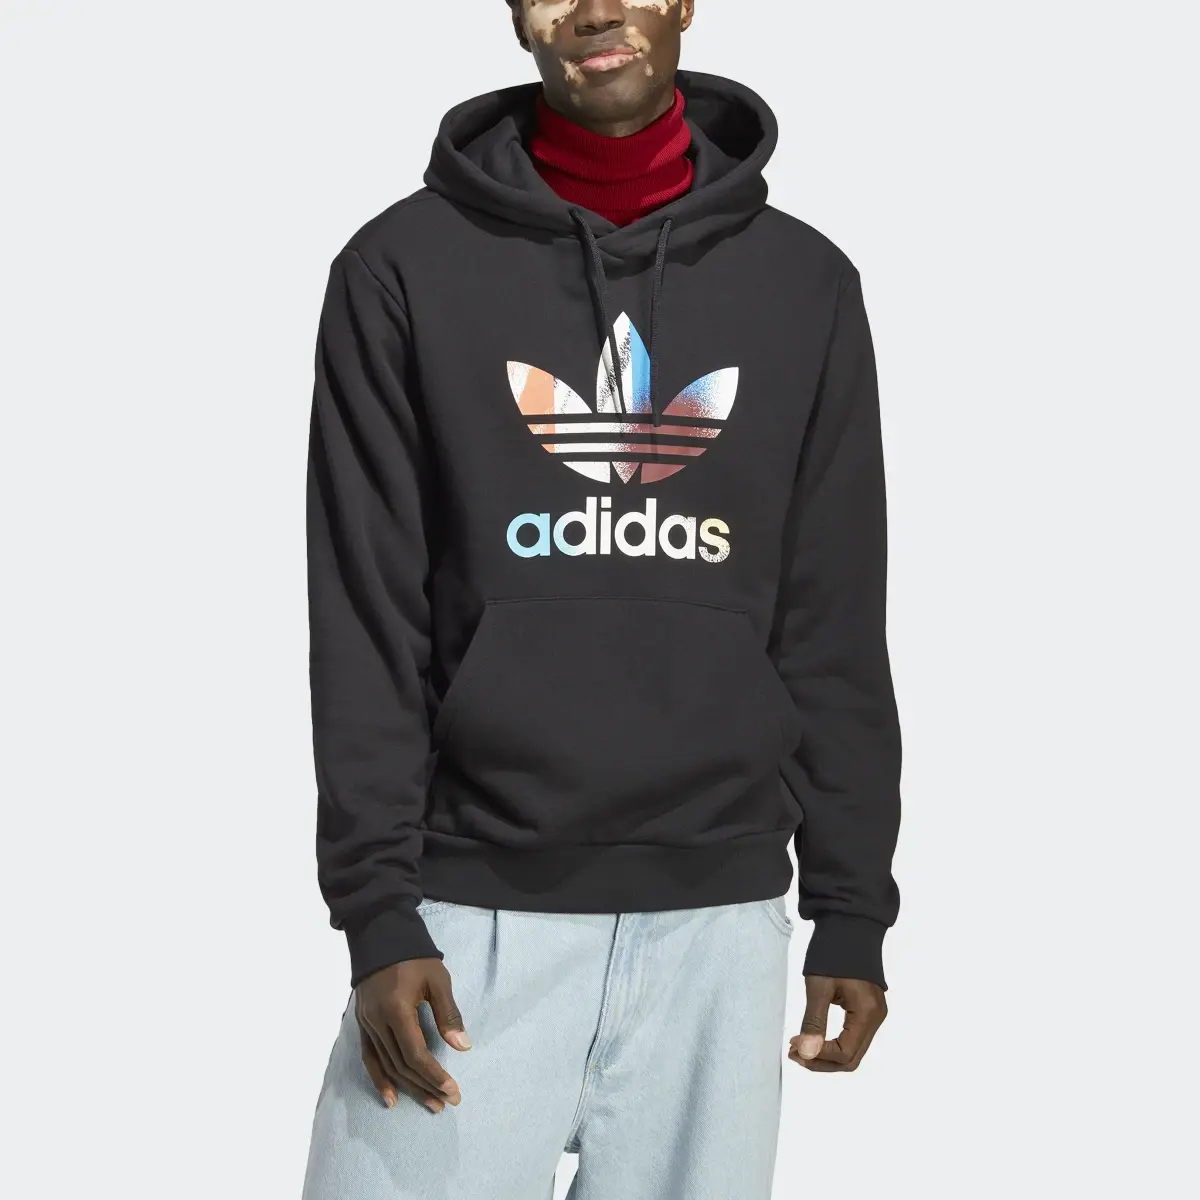 Adidas Hoodie Graphics off the Grid. 1